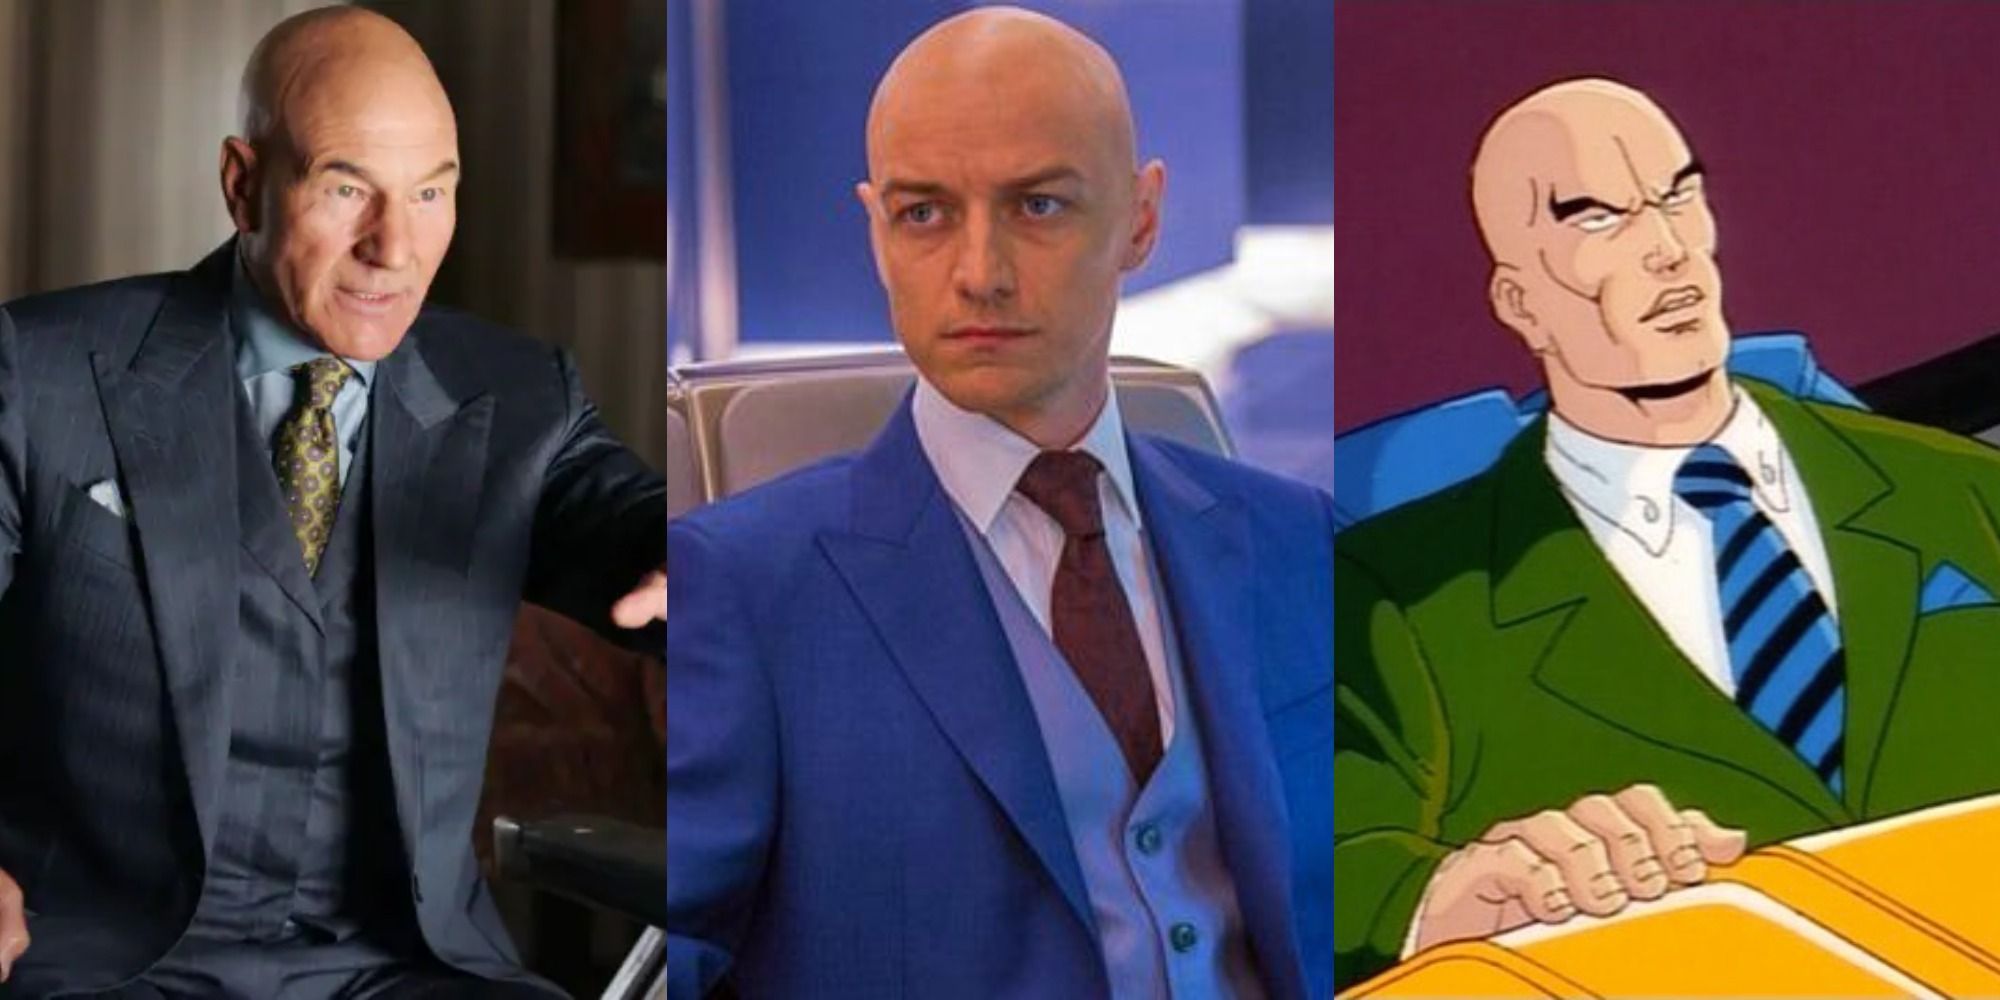 Split image of Patrick Stewart, James McAvoy, and the animated version of Professor X